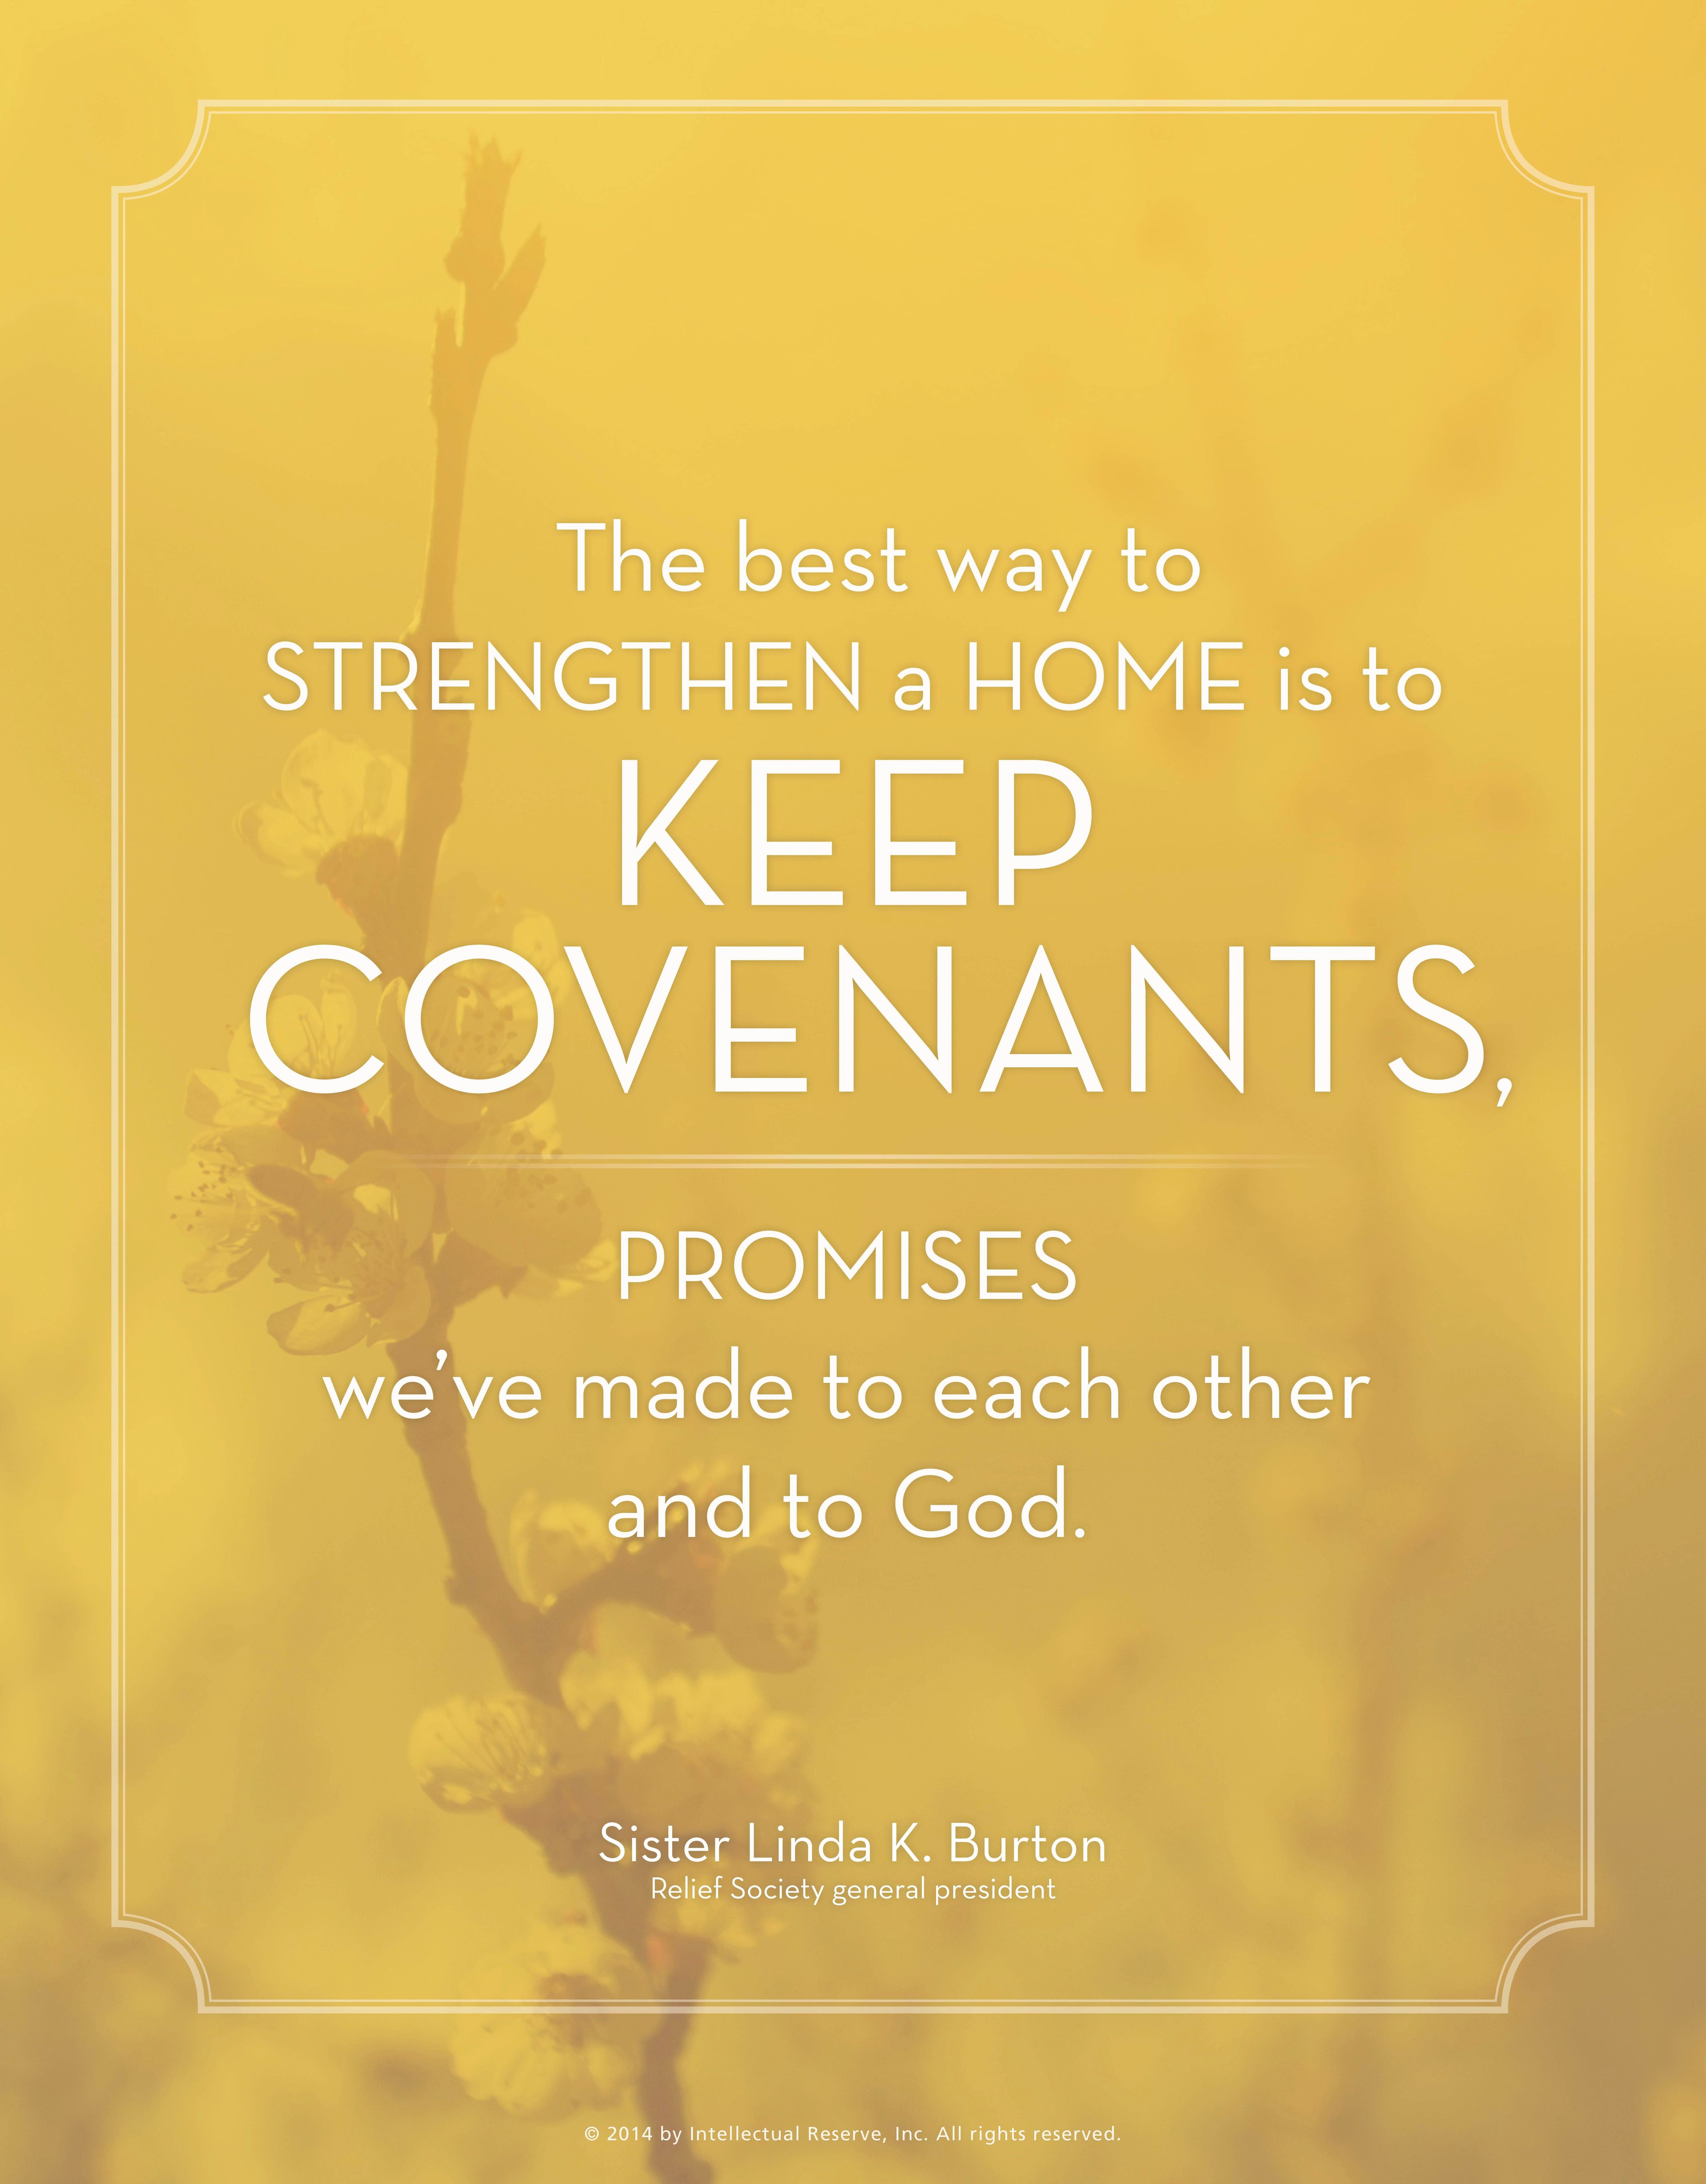 “The best way to strengthen a home is to keep covenants, promises we’ve made to each other and to God.”—Sister Linda K. Burton, “Wanted: Hands and Hearts to Hasten the Work”